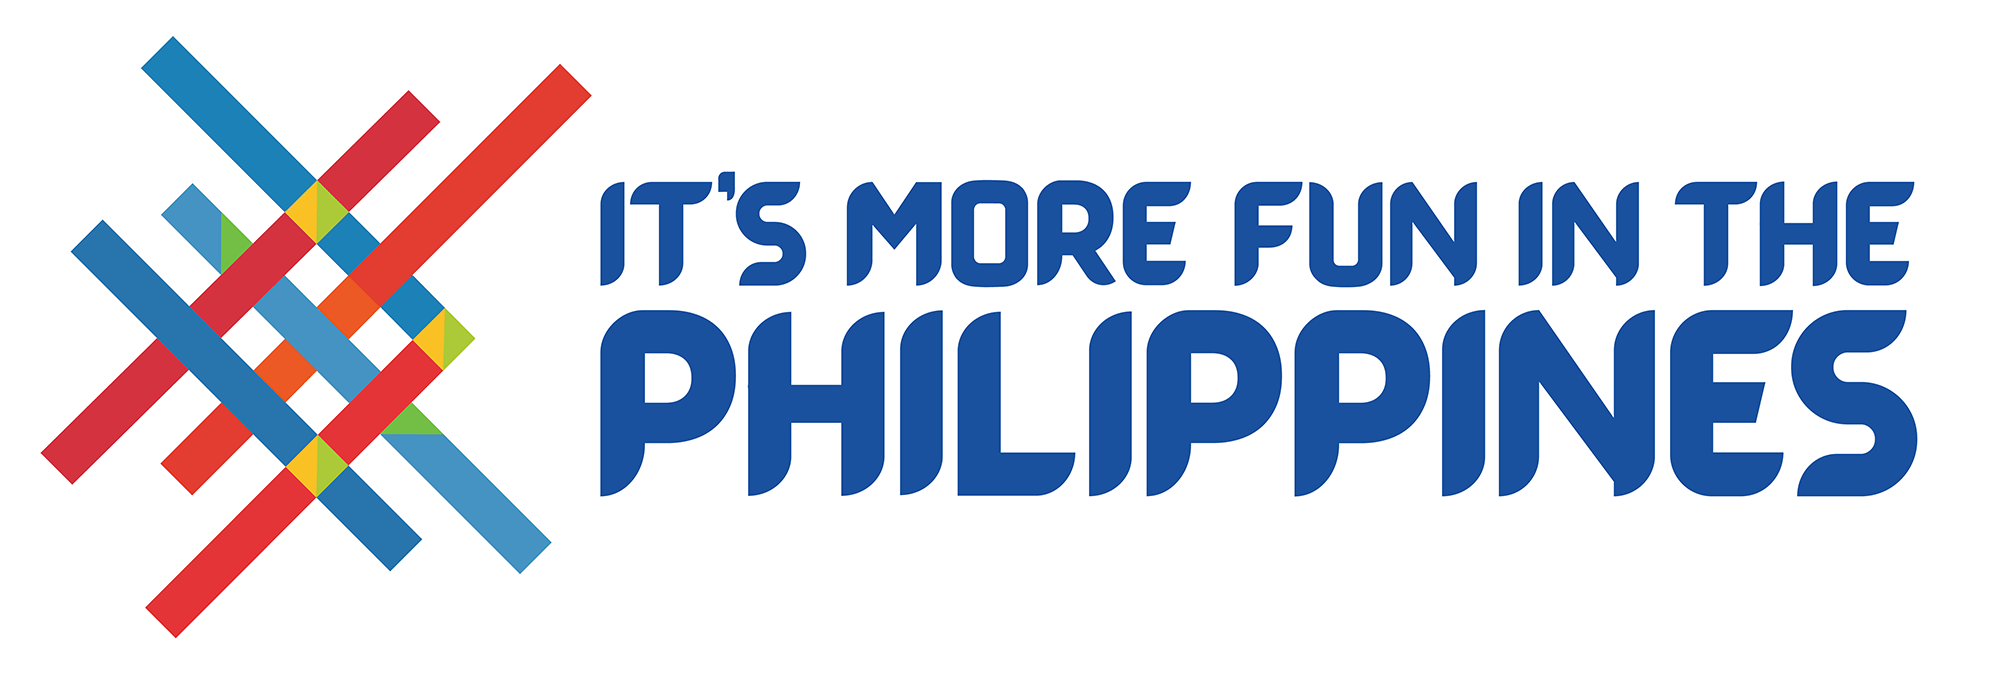 it more fun in the philippines logo download